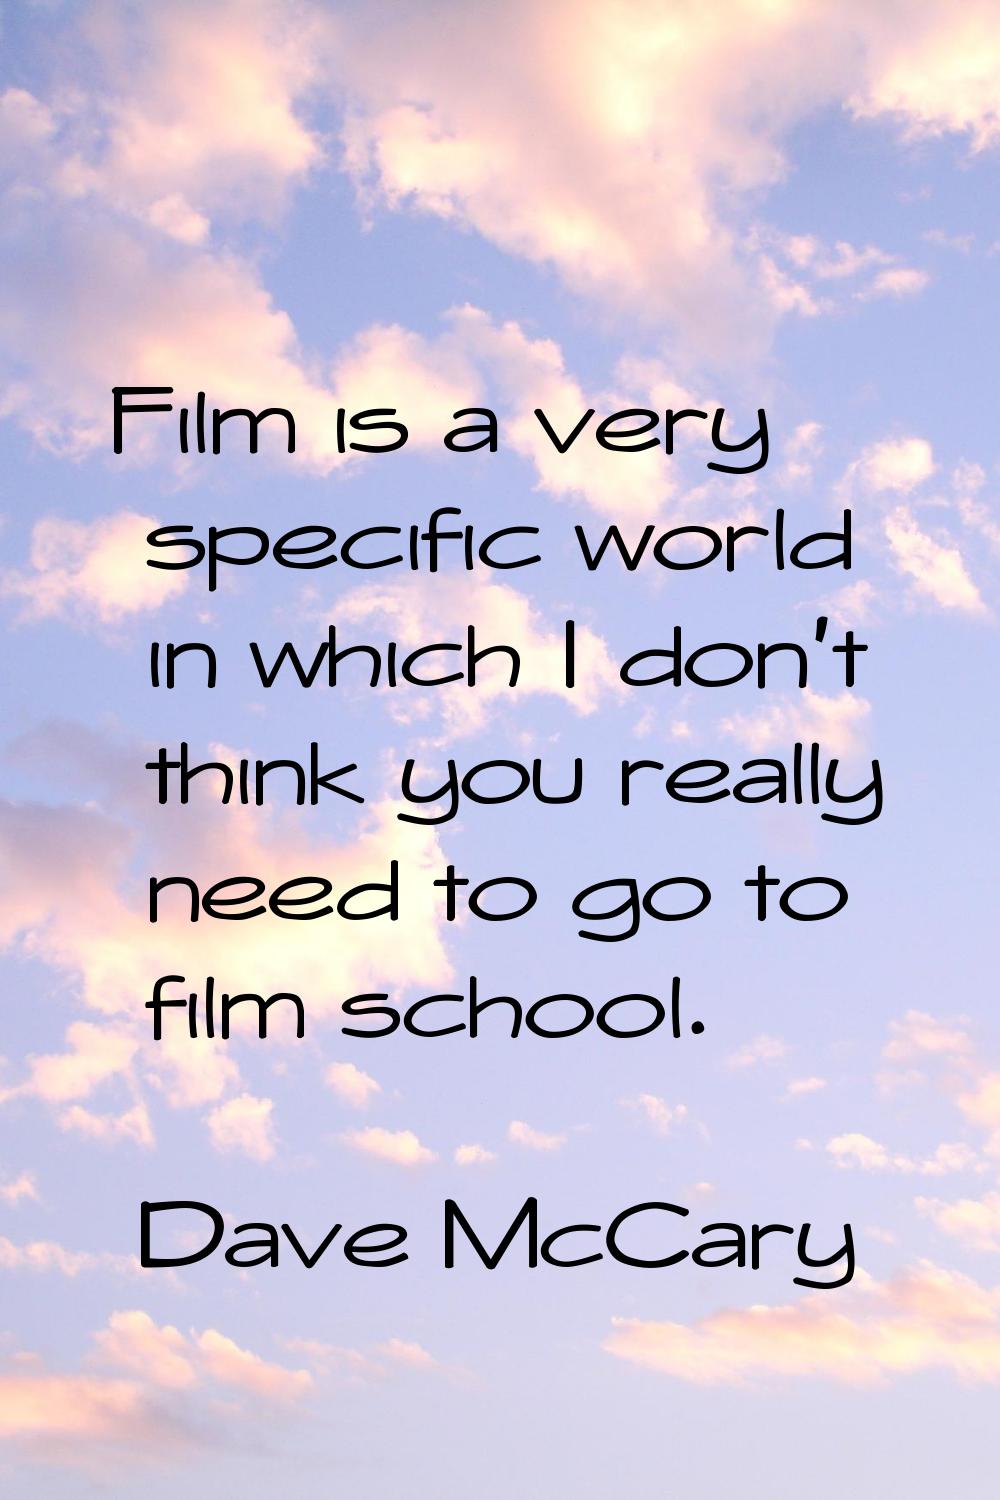 Film is a very specific world in which I don't think you really need to go to film school.